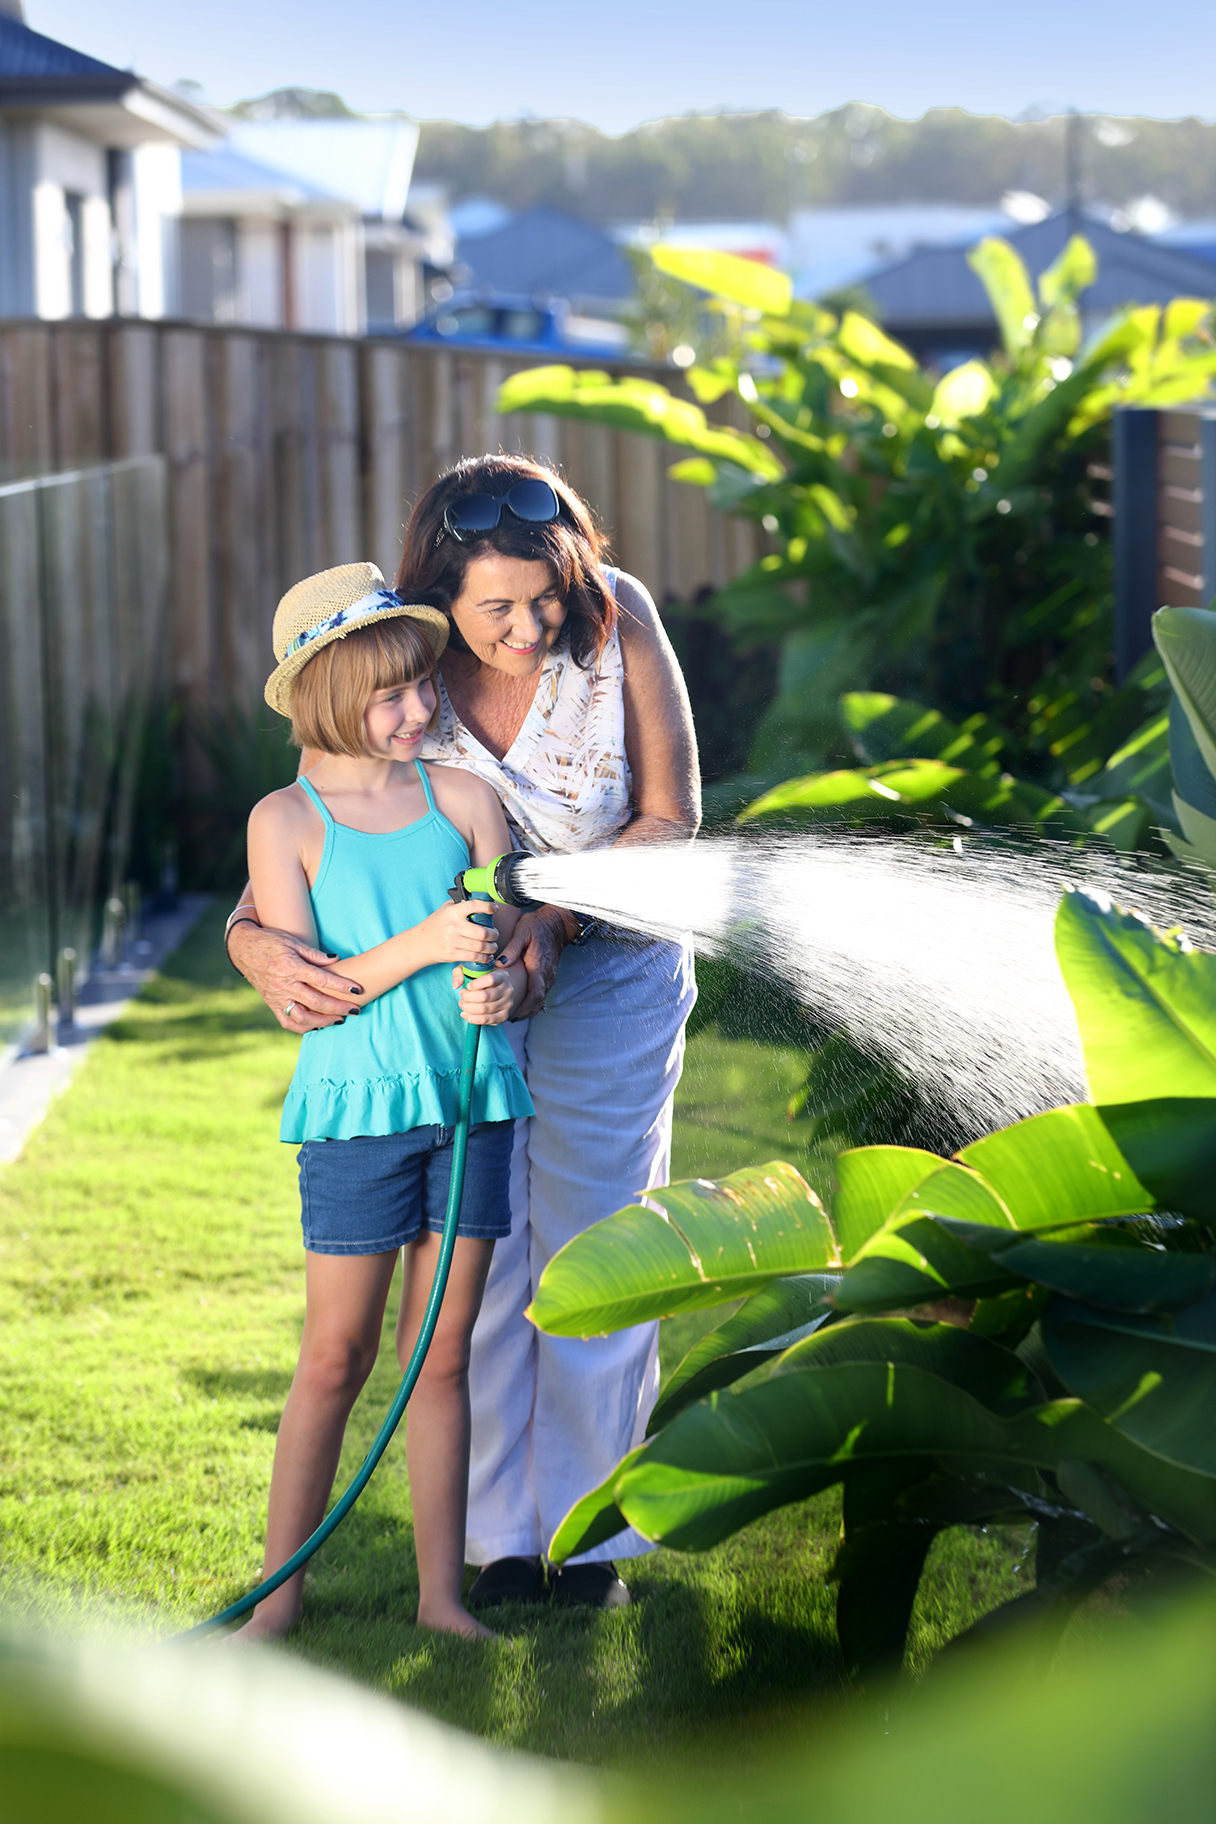 Woman and girl watering residential garden with hose